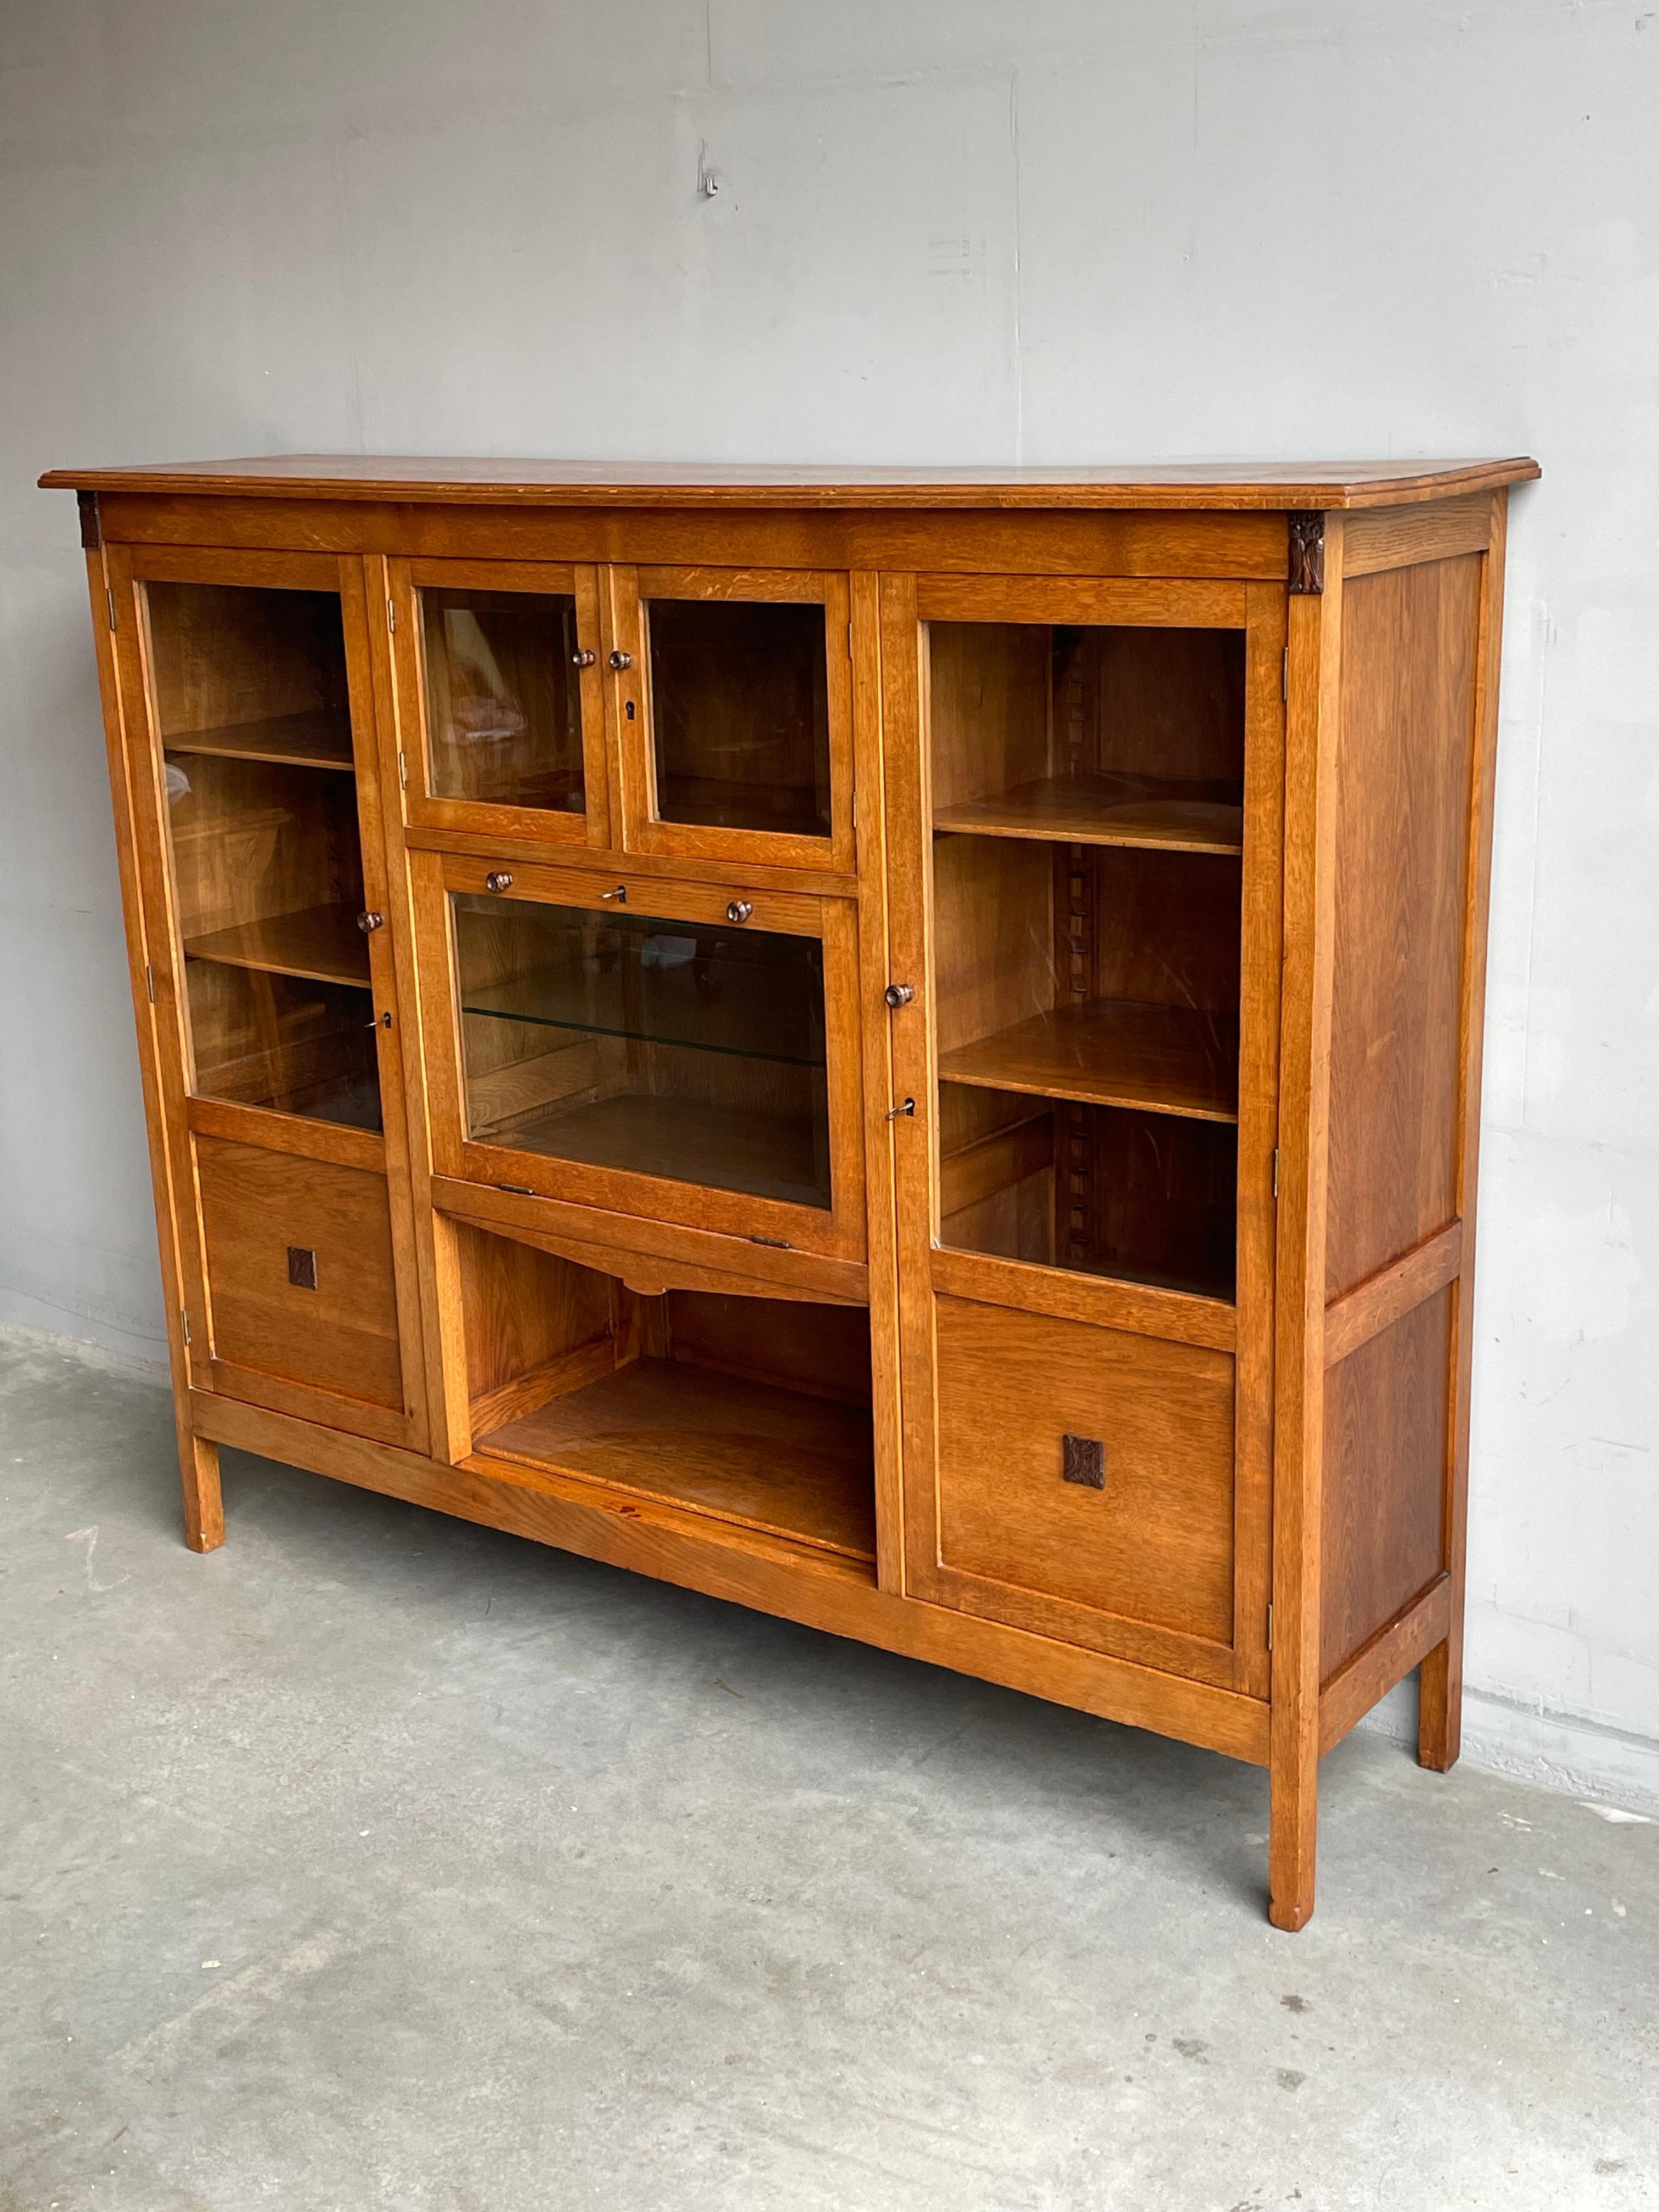 Good size and highly stylish antique bookcase with all working locks and keys.

When it comes to antique furniture, historically, bookcases are the most sought after in the world. The Dutch Arts and Crafts style is unique in its own right and it is